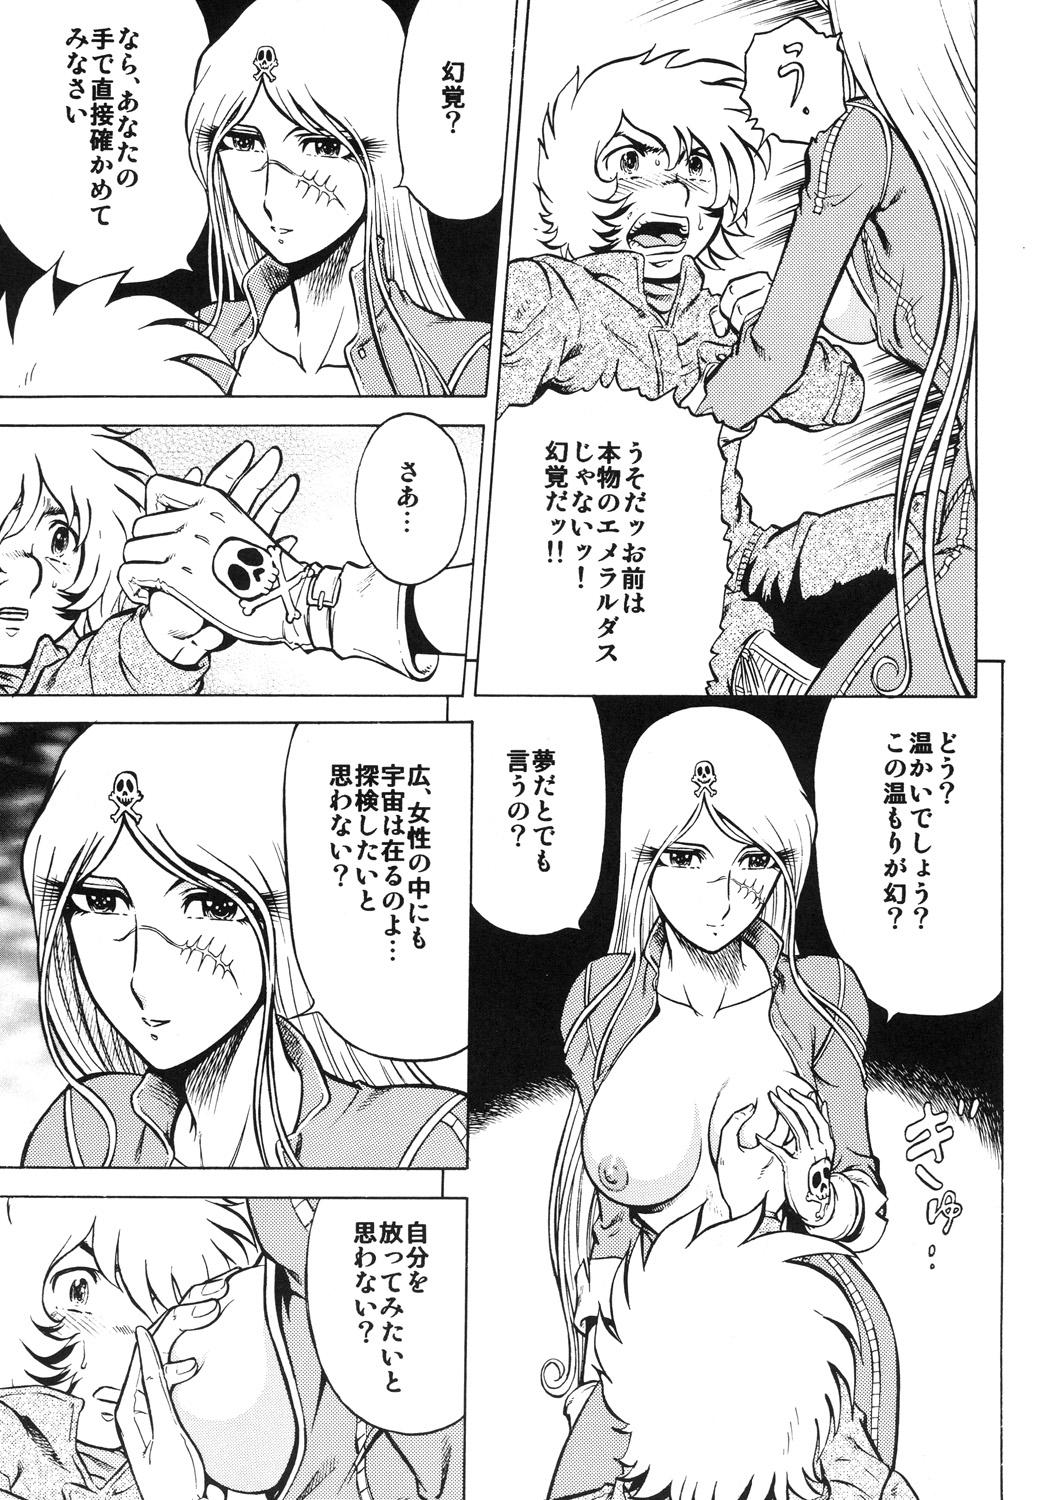 French NightHead+2 - Space pirate captain harlock Bizarre - Page 10